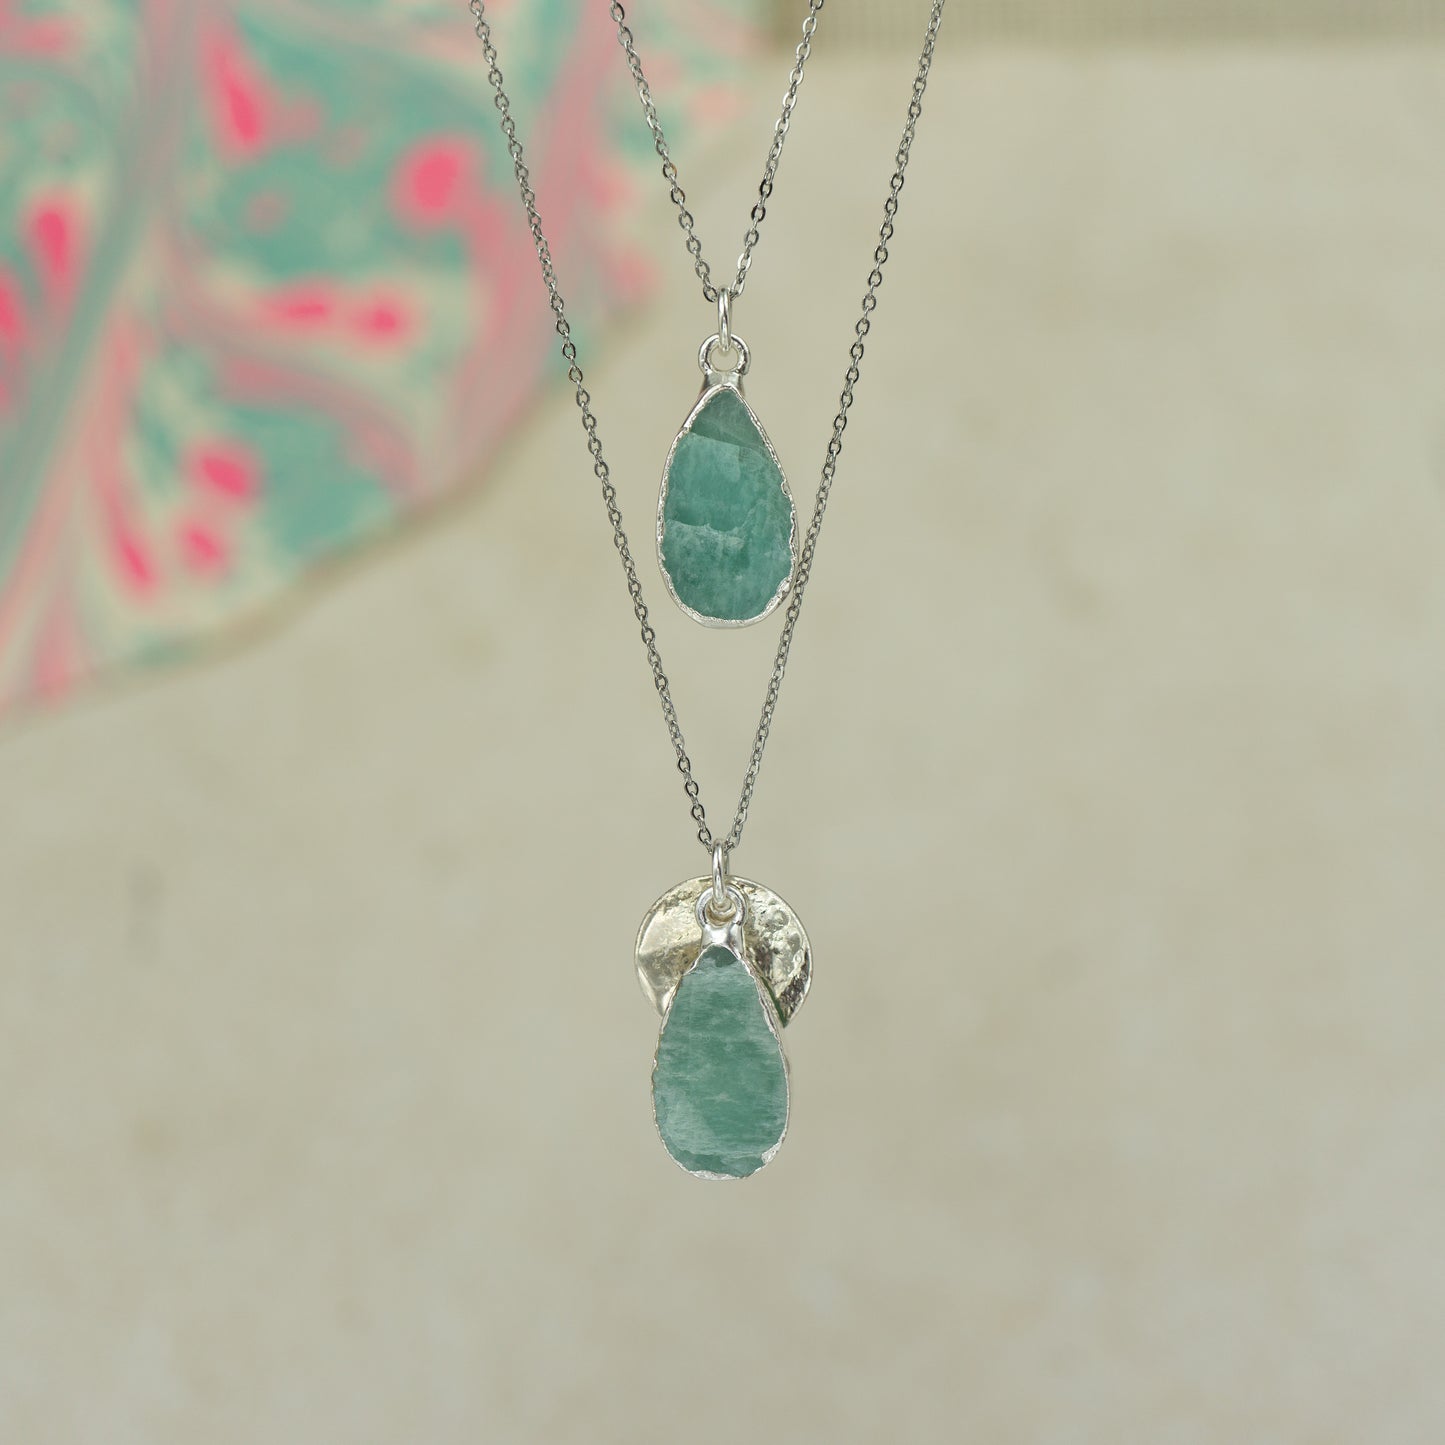 Raw blue Aquamarine teardrop pear shaped pendants finished in silver on a chains.